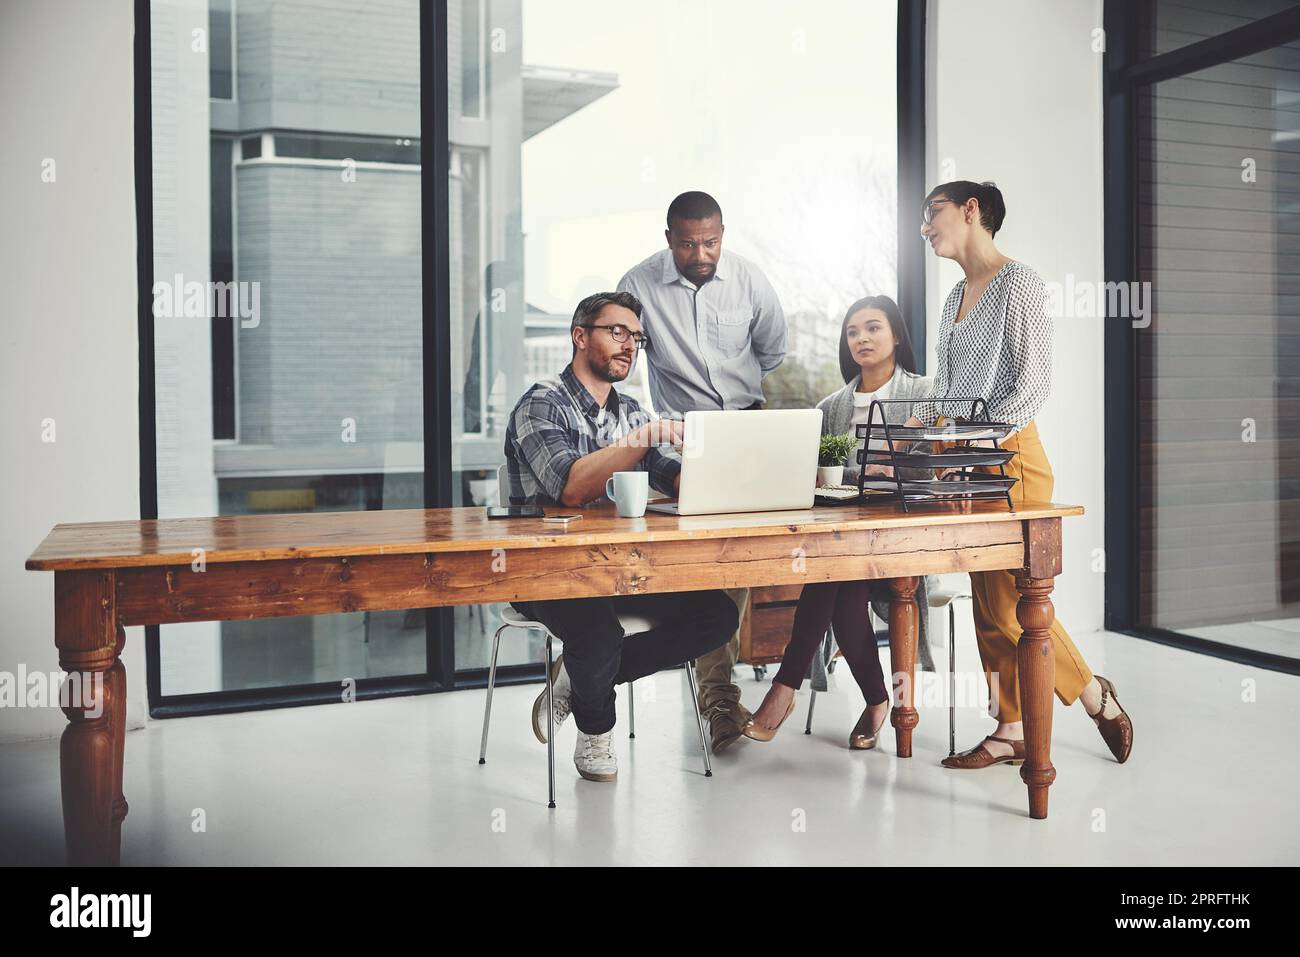 Teamwork makes the dream work. Full length shot of a group of businesspeople gathered around a laptop in their office. Stock Photo